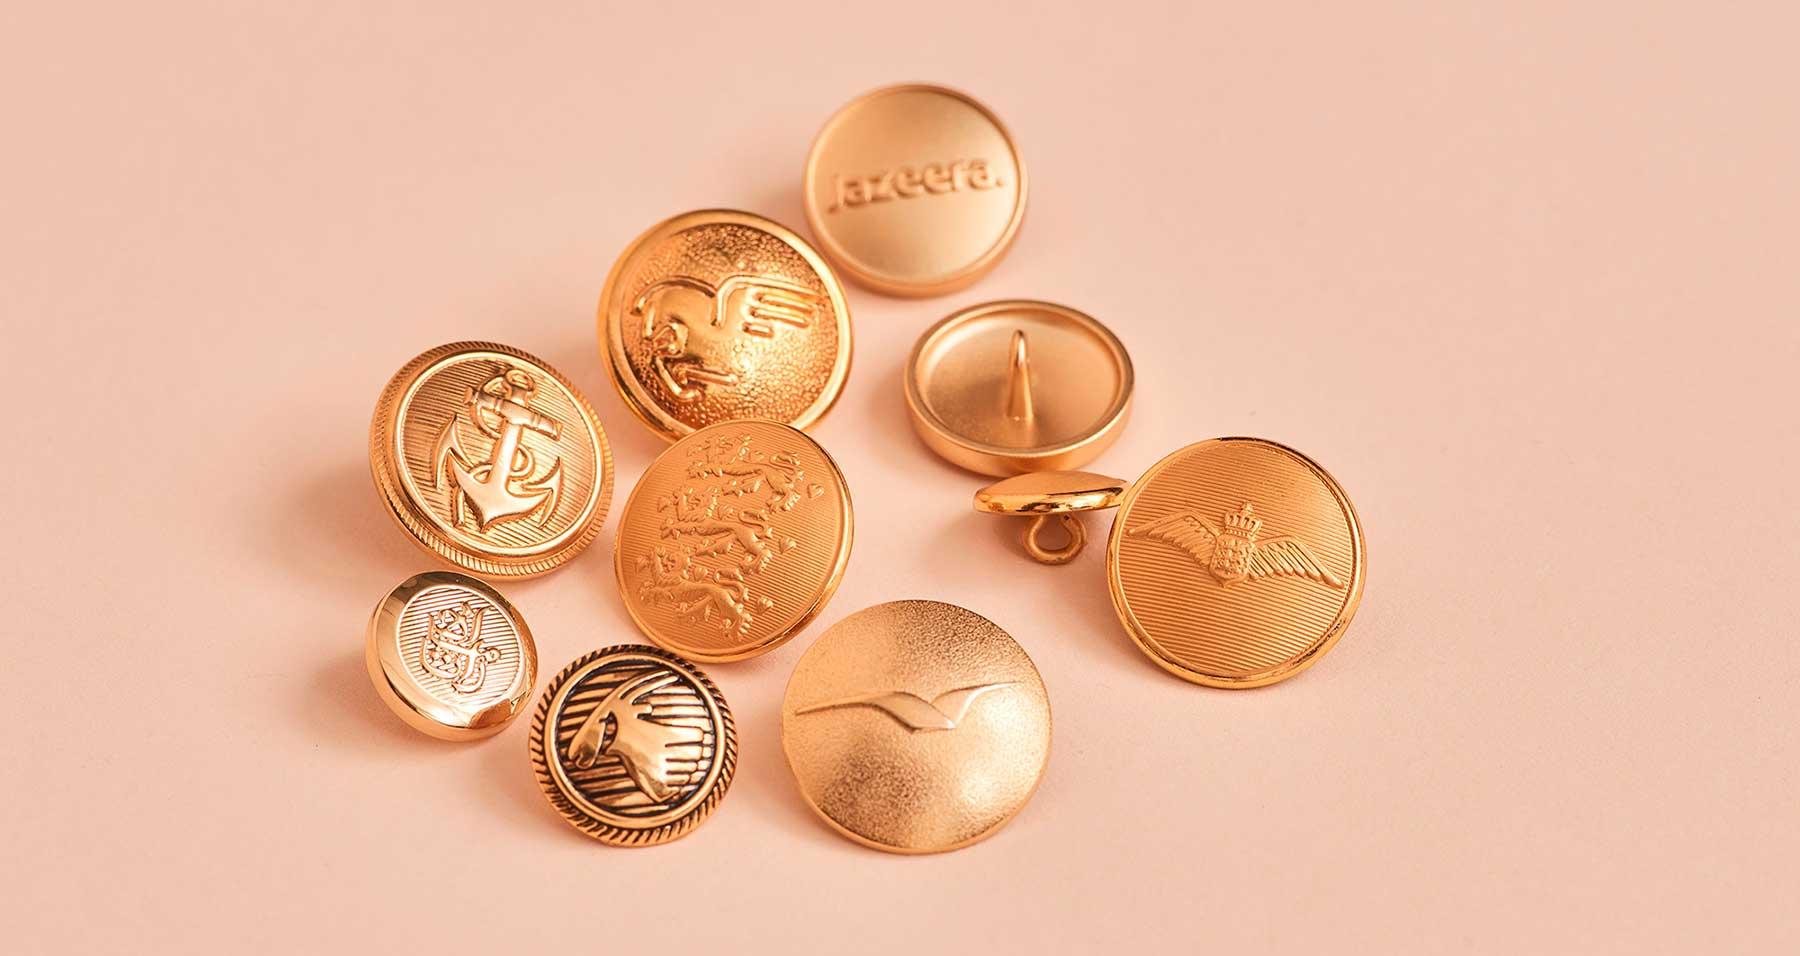 Logo buttons for airline uniforms